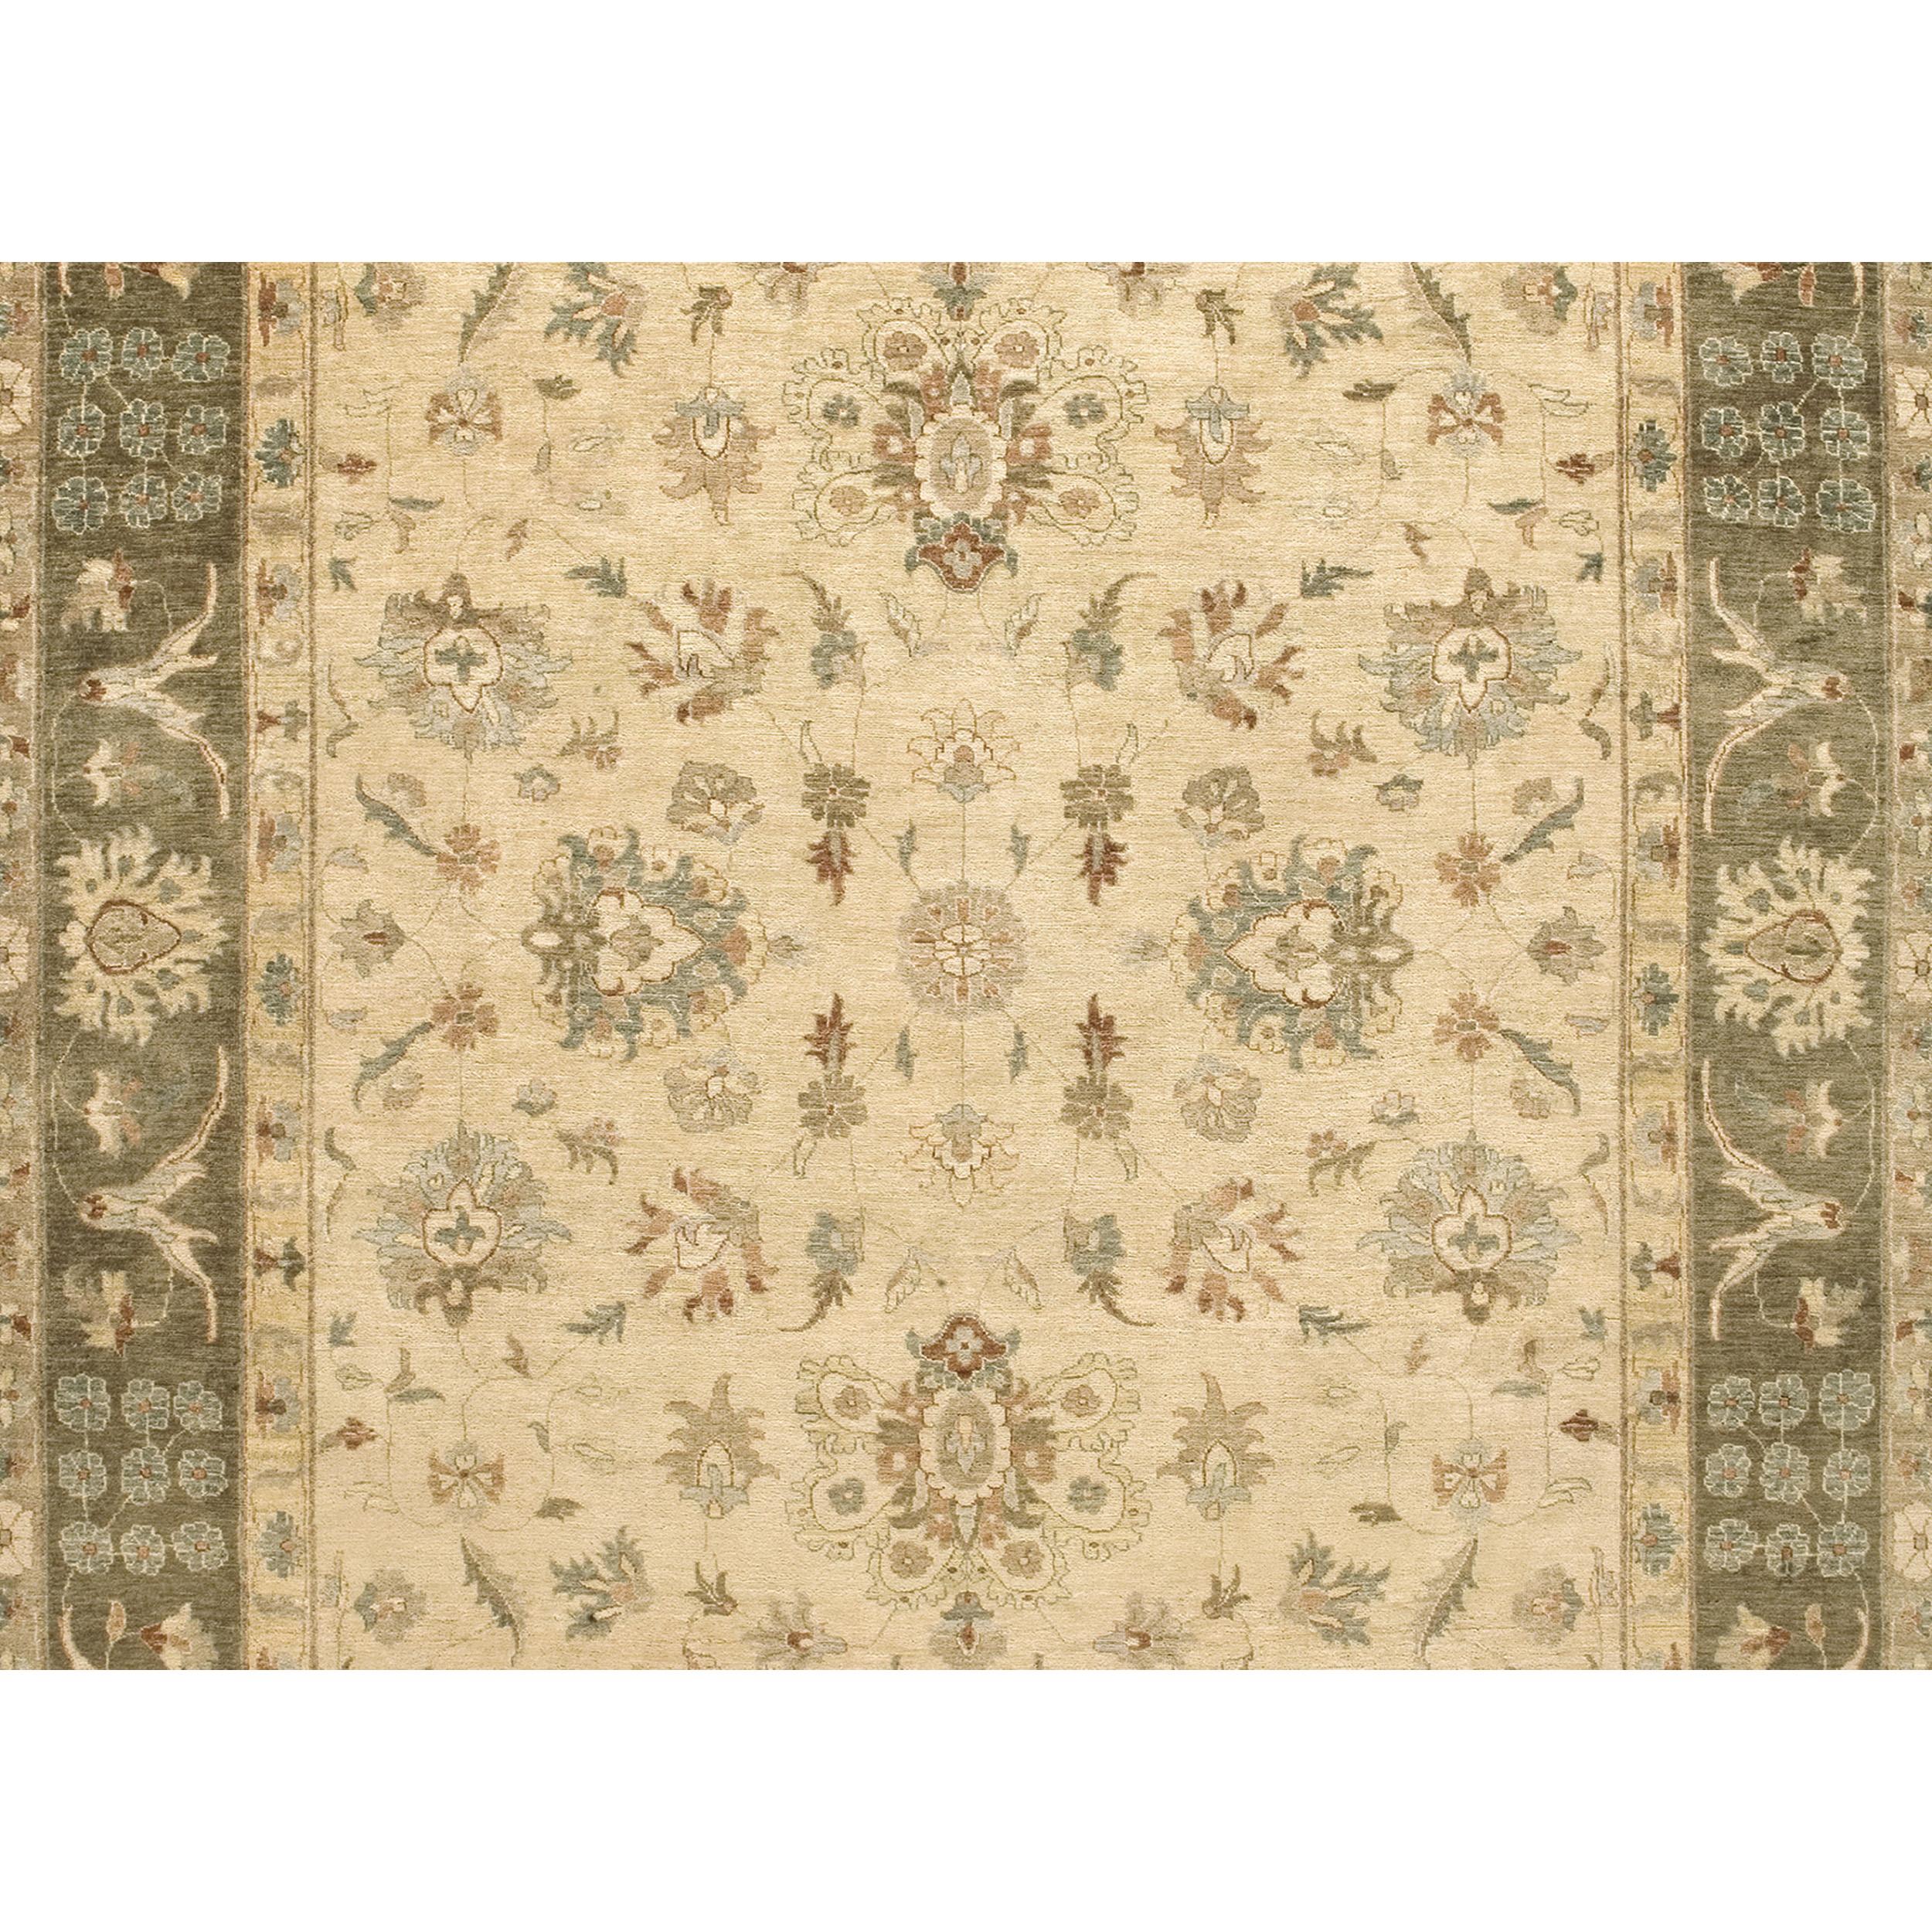 Luxury Traditional Hand-Knotted Kashan Cream& Brown 12x18 Rug In New Condition For Sale In Secaucus, NJ